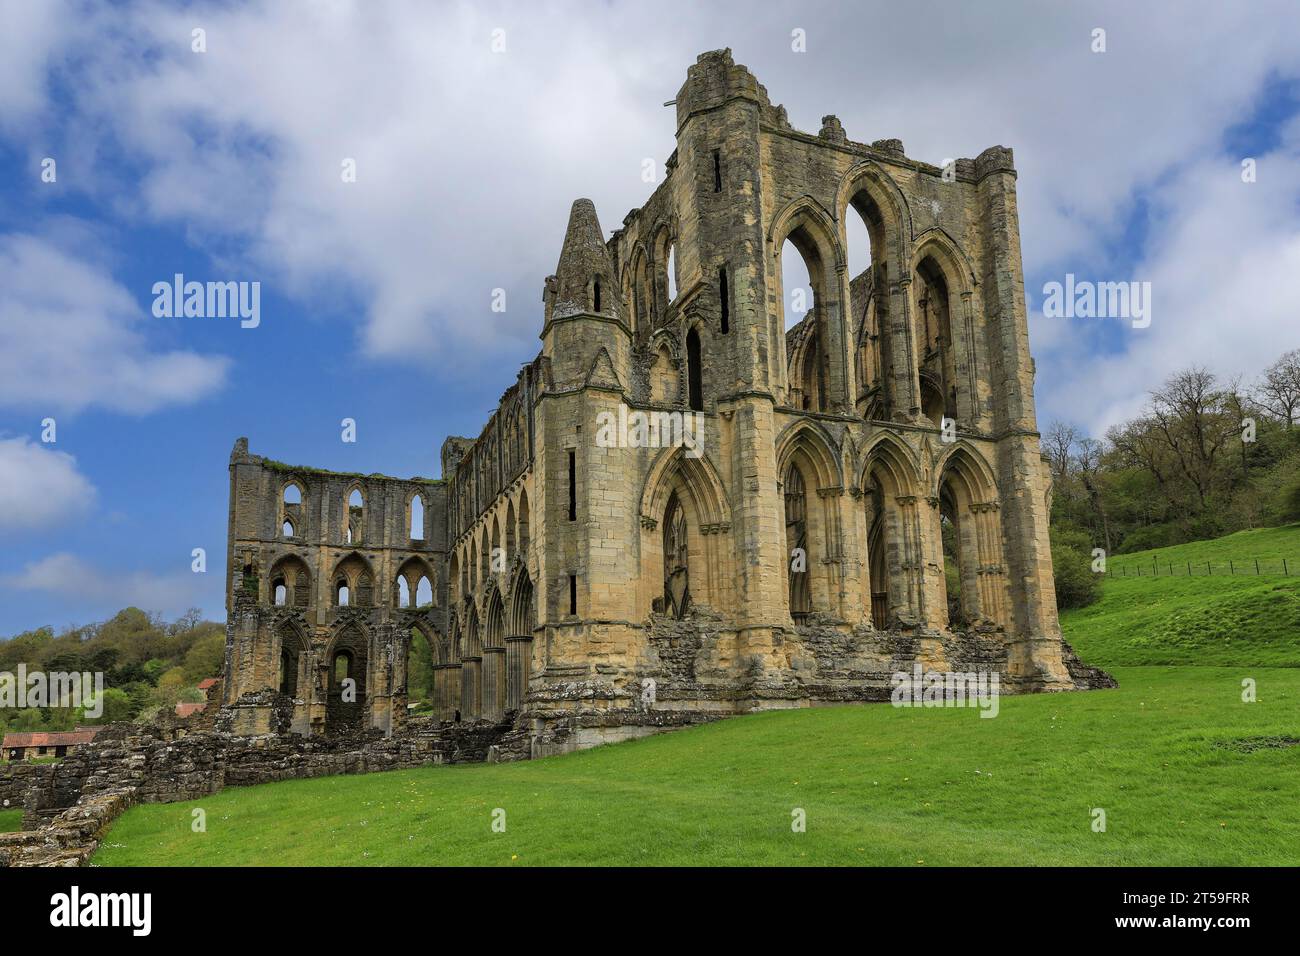 The ruins of the church at Rievaulx Abbey, Rievaulx, near Helmsley, in the North York Moors National Park, North Yorkshire, England, UK Stock Photo